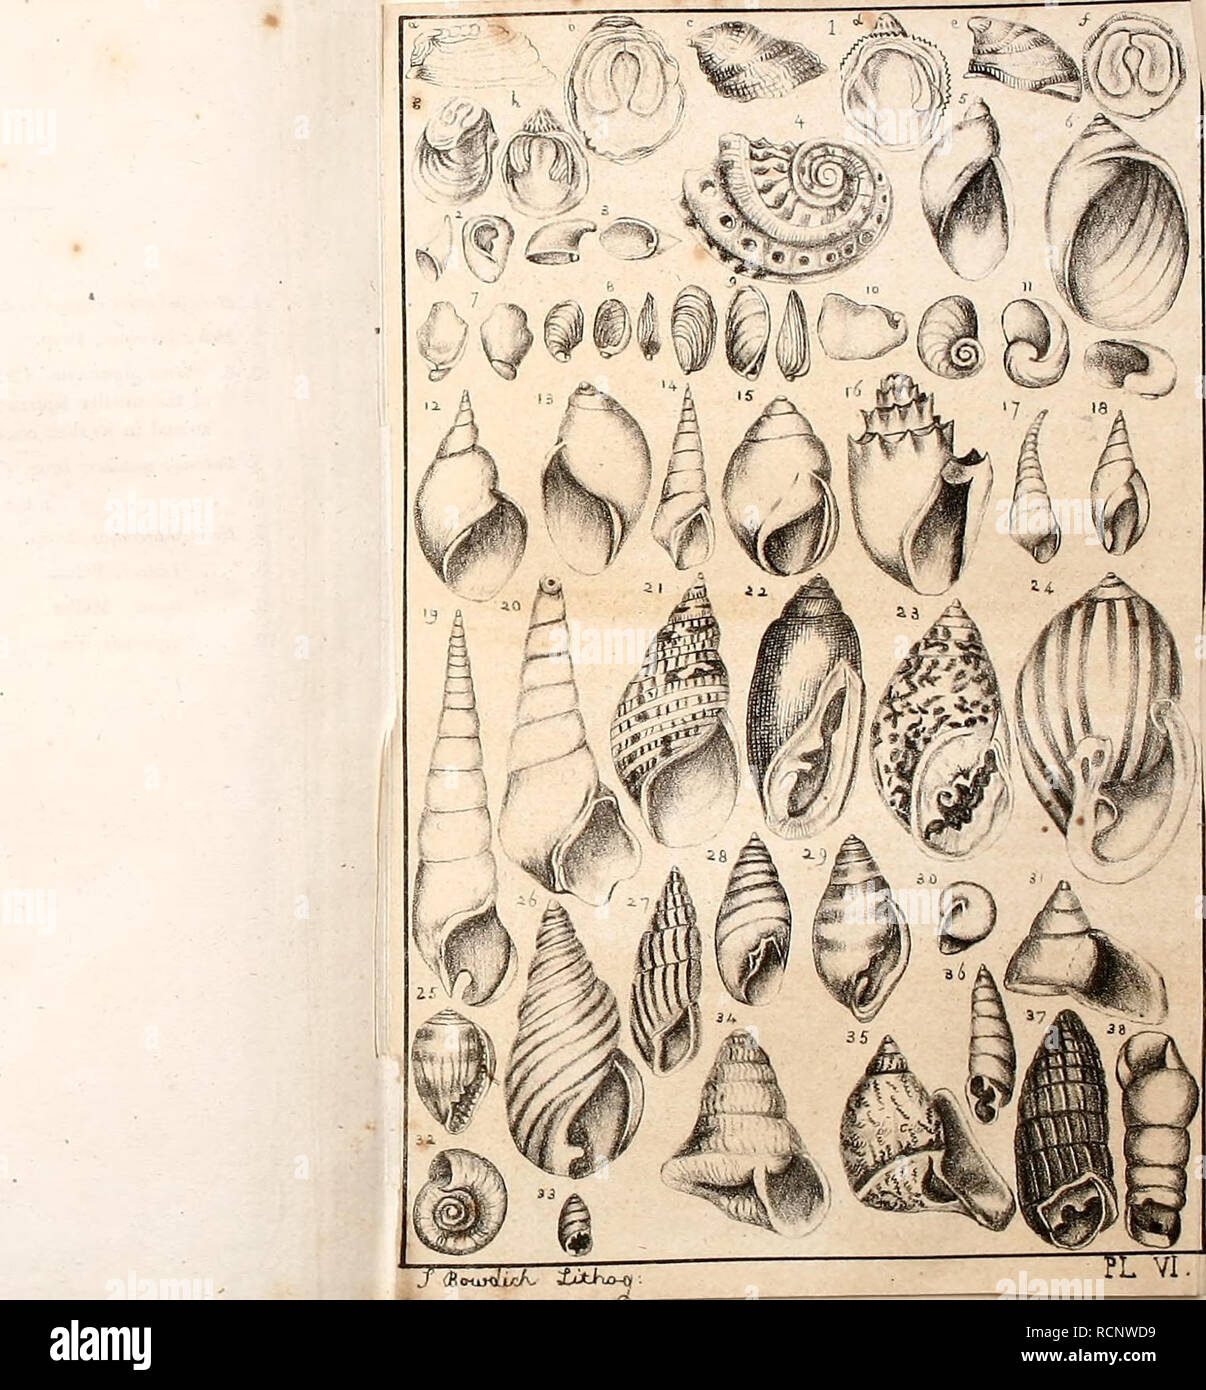 . Elements of conchology : including the fossil genera and the animals. Mollusks; Mollusks, Fossil. PLATE VI. . Hipponyx cornucopias. Defr. a. In profile, 1-2. b. Shewing the support within, 1-2. c. In profile, without the support, 1-2. I d. Seen within. e. On its support, as it was found. f. The support seen within. g. Hipponyx mitrala, Defr. a recent shell, with its support. Jt. Hipponyx cornucopia?, shewing the mouth. 2. Plectrophorus costalus, Feruss. 3. . orbignii, Feruss. 4. Padollus scalaris, Leach. 5. Ambrettc Succinea, Drap. (Amphibidima, Lain.) 6. Amphibiduna, Lam. 7. Testacellus am Stock Photo